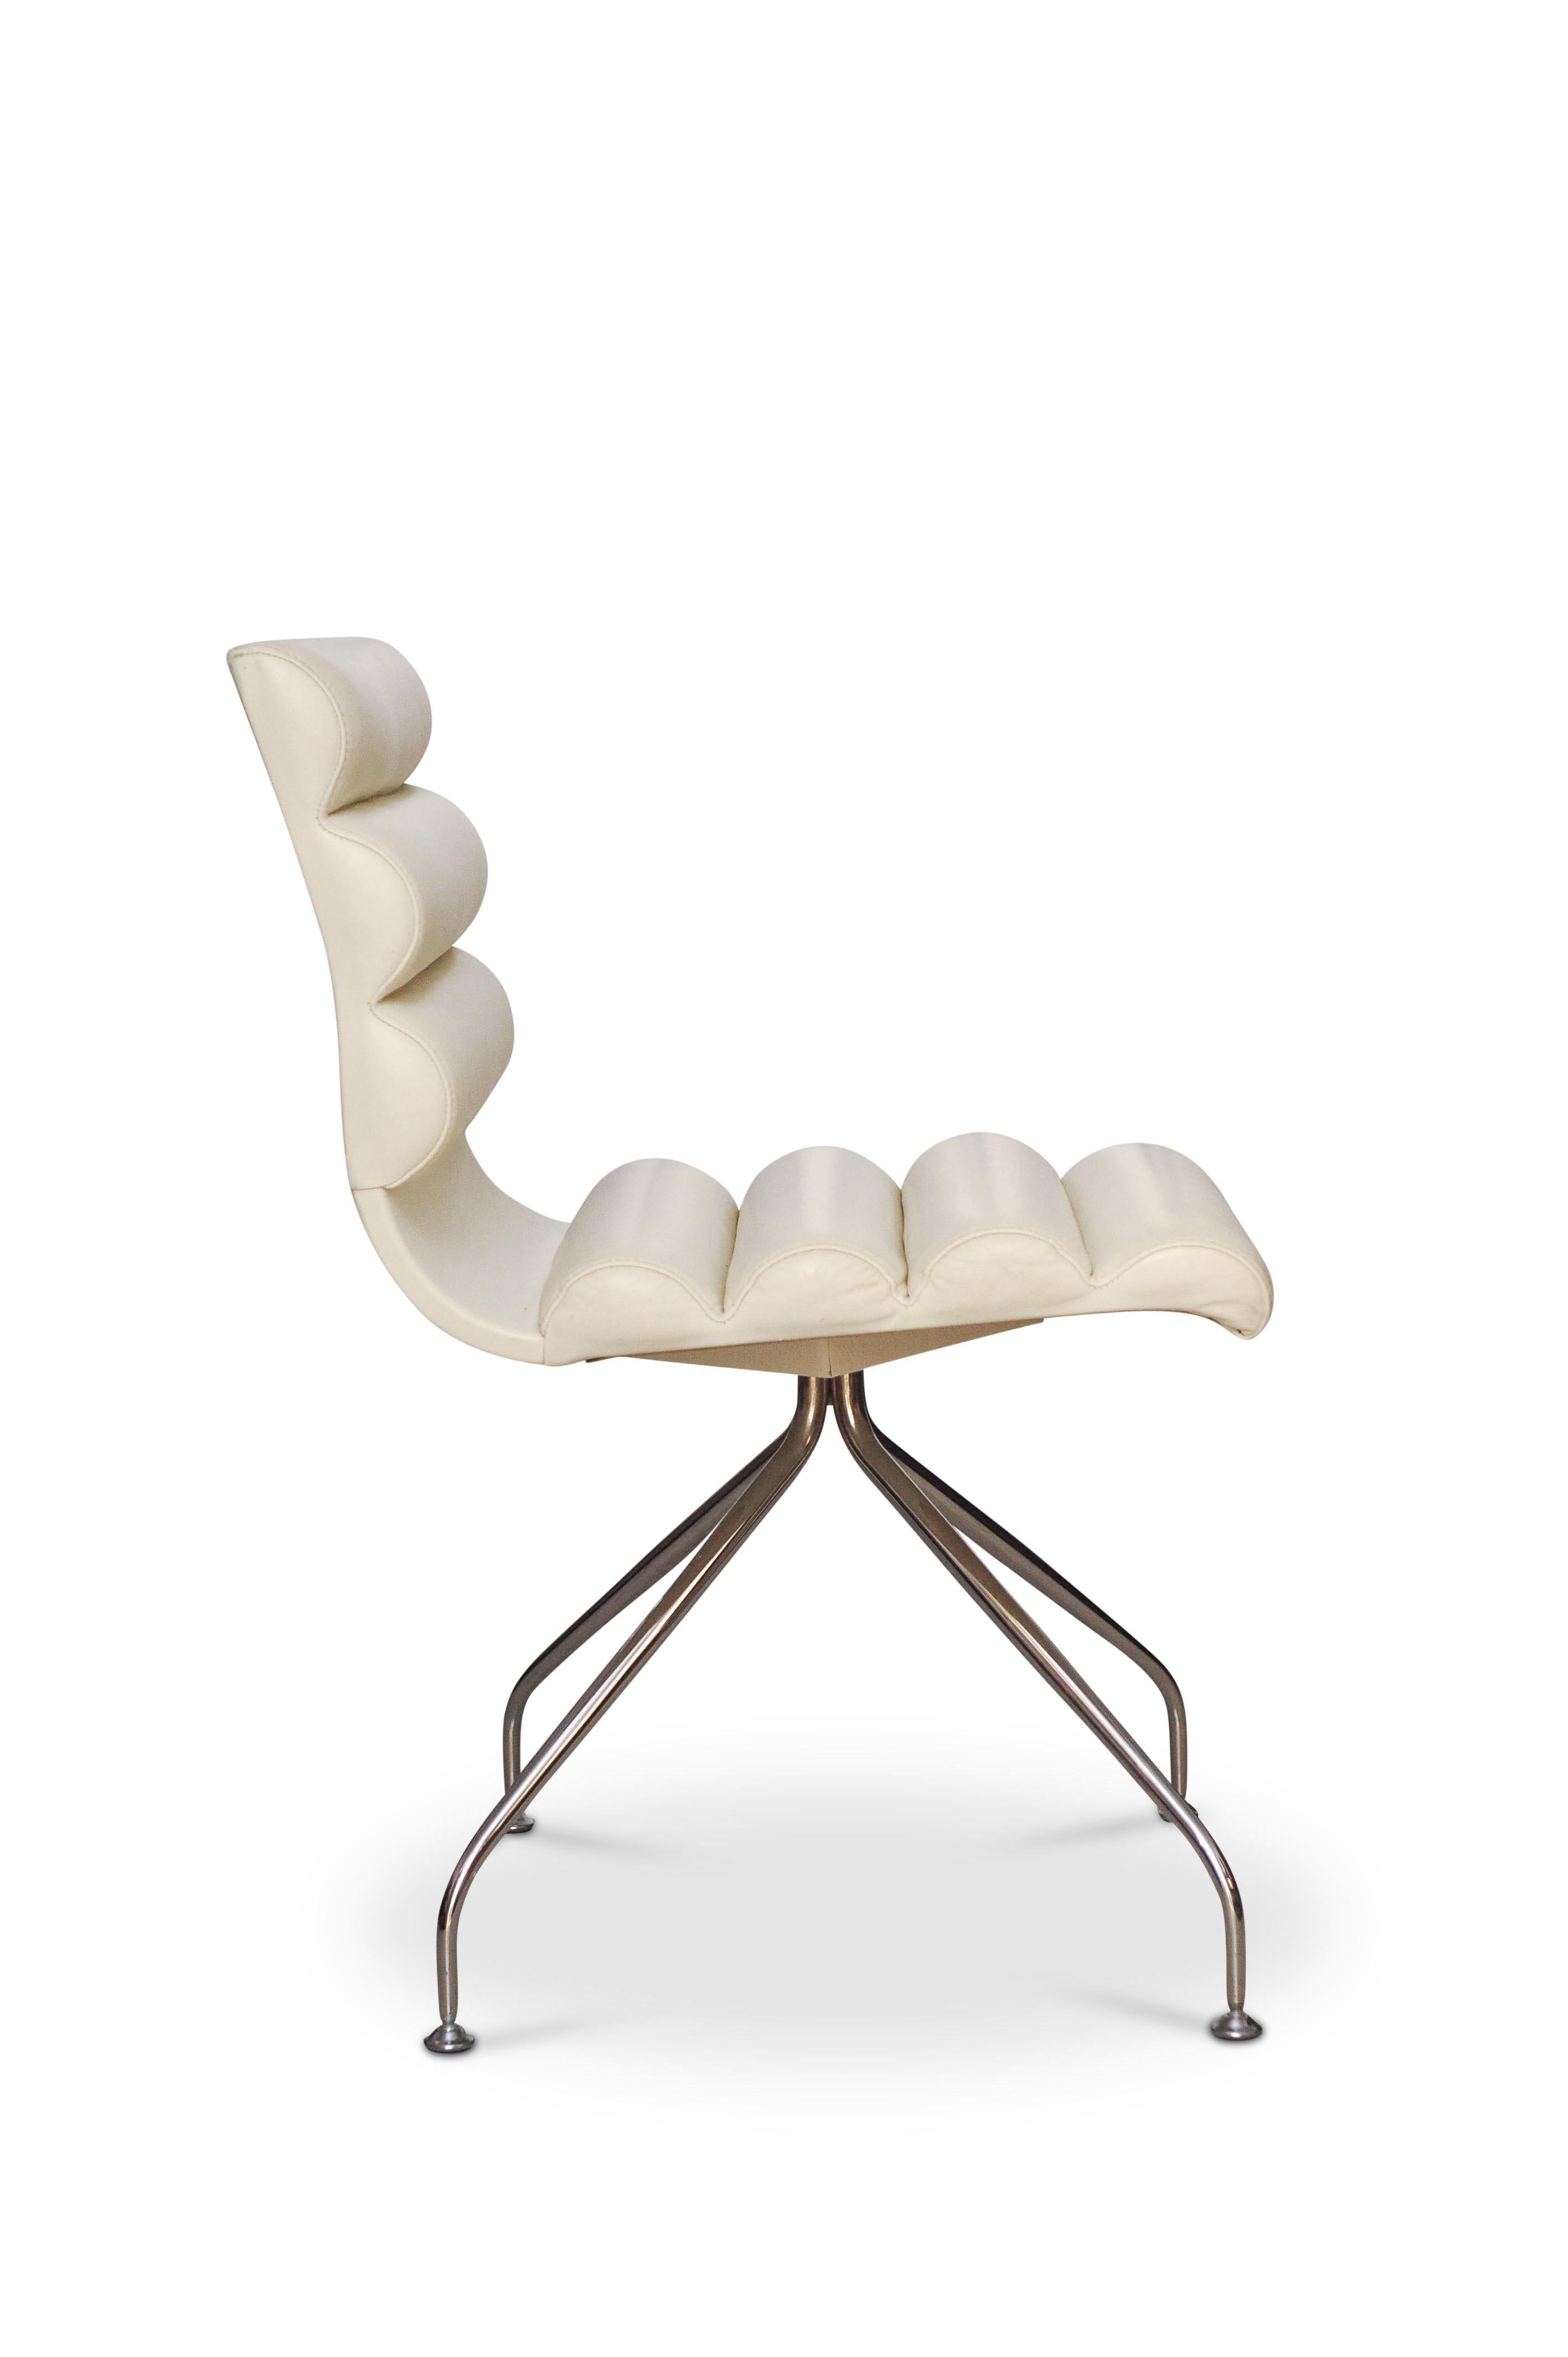 International Style Giovanna Modonutti 'Giofra' for Frag, a Set of 4 White Leather 'Canouan' Chairs For Sale